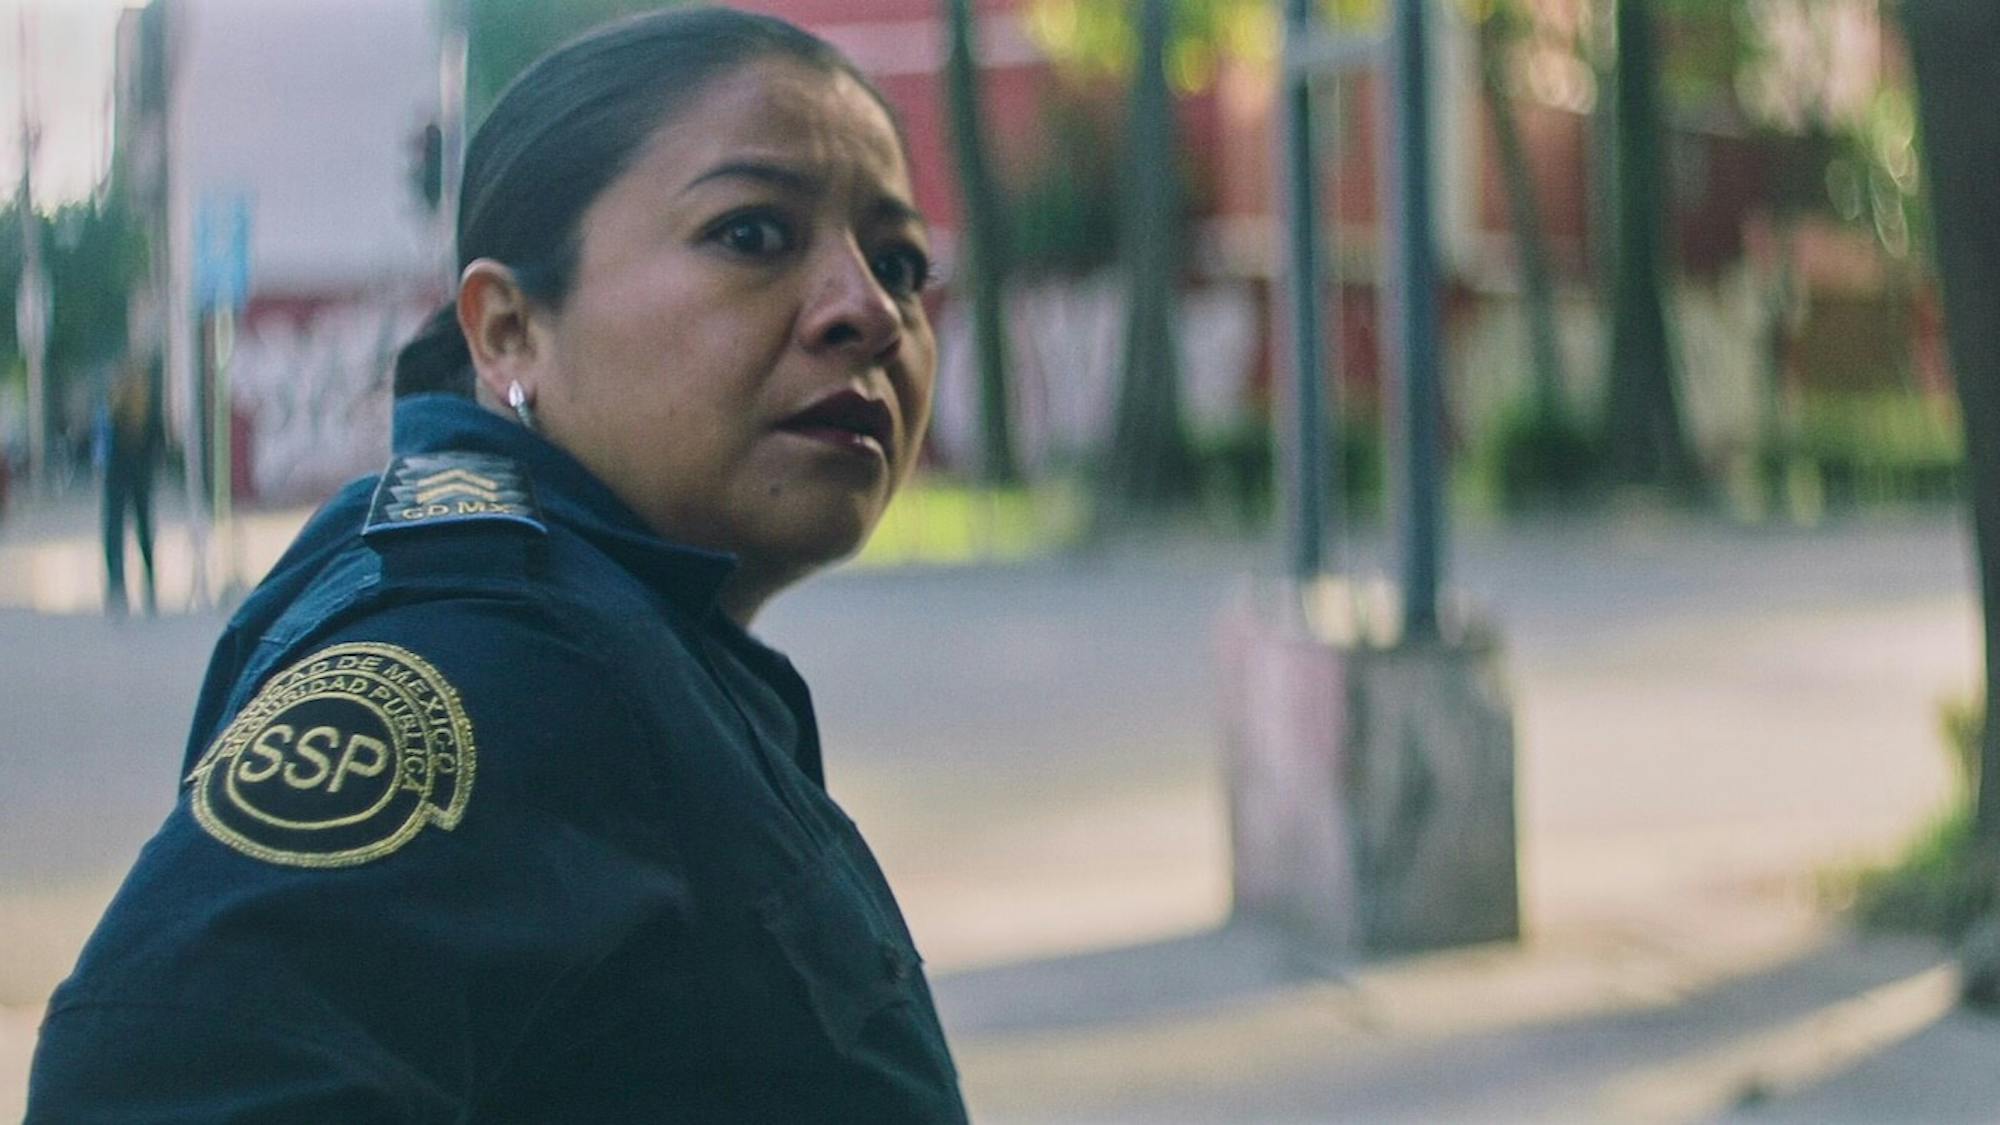 Mónica del Carmen wears her uniform and looks scared as she stands in an outdoor street.